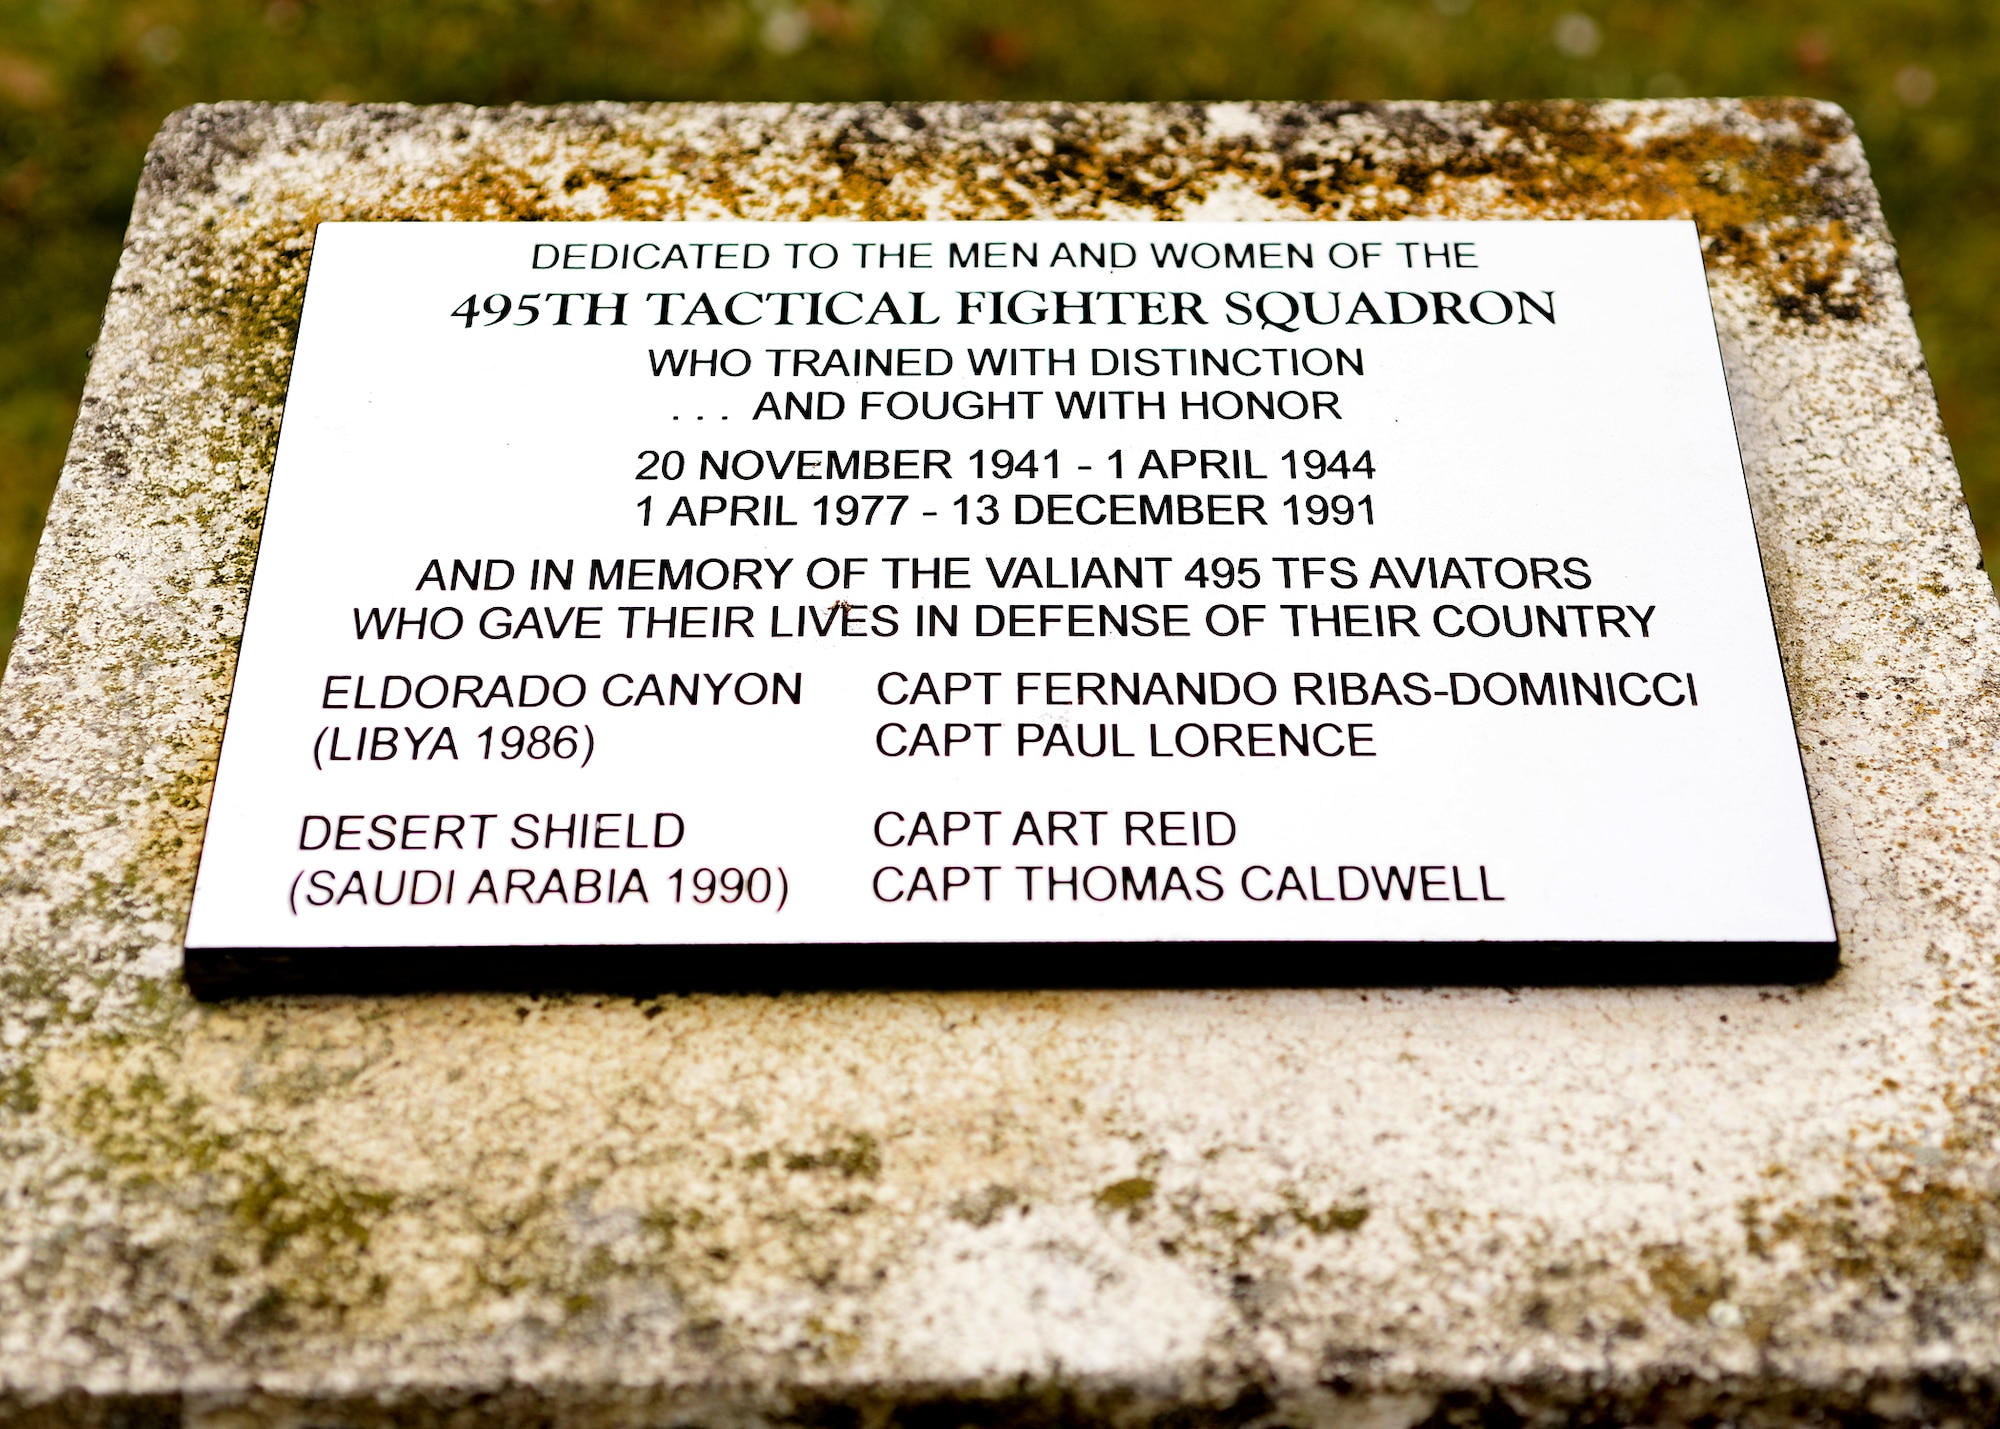 A monument dedicated to the men and women of the 495th Tactical Fighter Squadron was placed across from the 48th medical group at Royal Air Force Lakenheath, England, Dec. 13, 1991. Inscribed on the plaque are the names of Captains Ribas-Dominicci and Lorence’s in memory of their service and sacrifice during Operation El Dorado Canyon. (U.S. Air Force photo/Tech. Sgt. Matthew Plew)